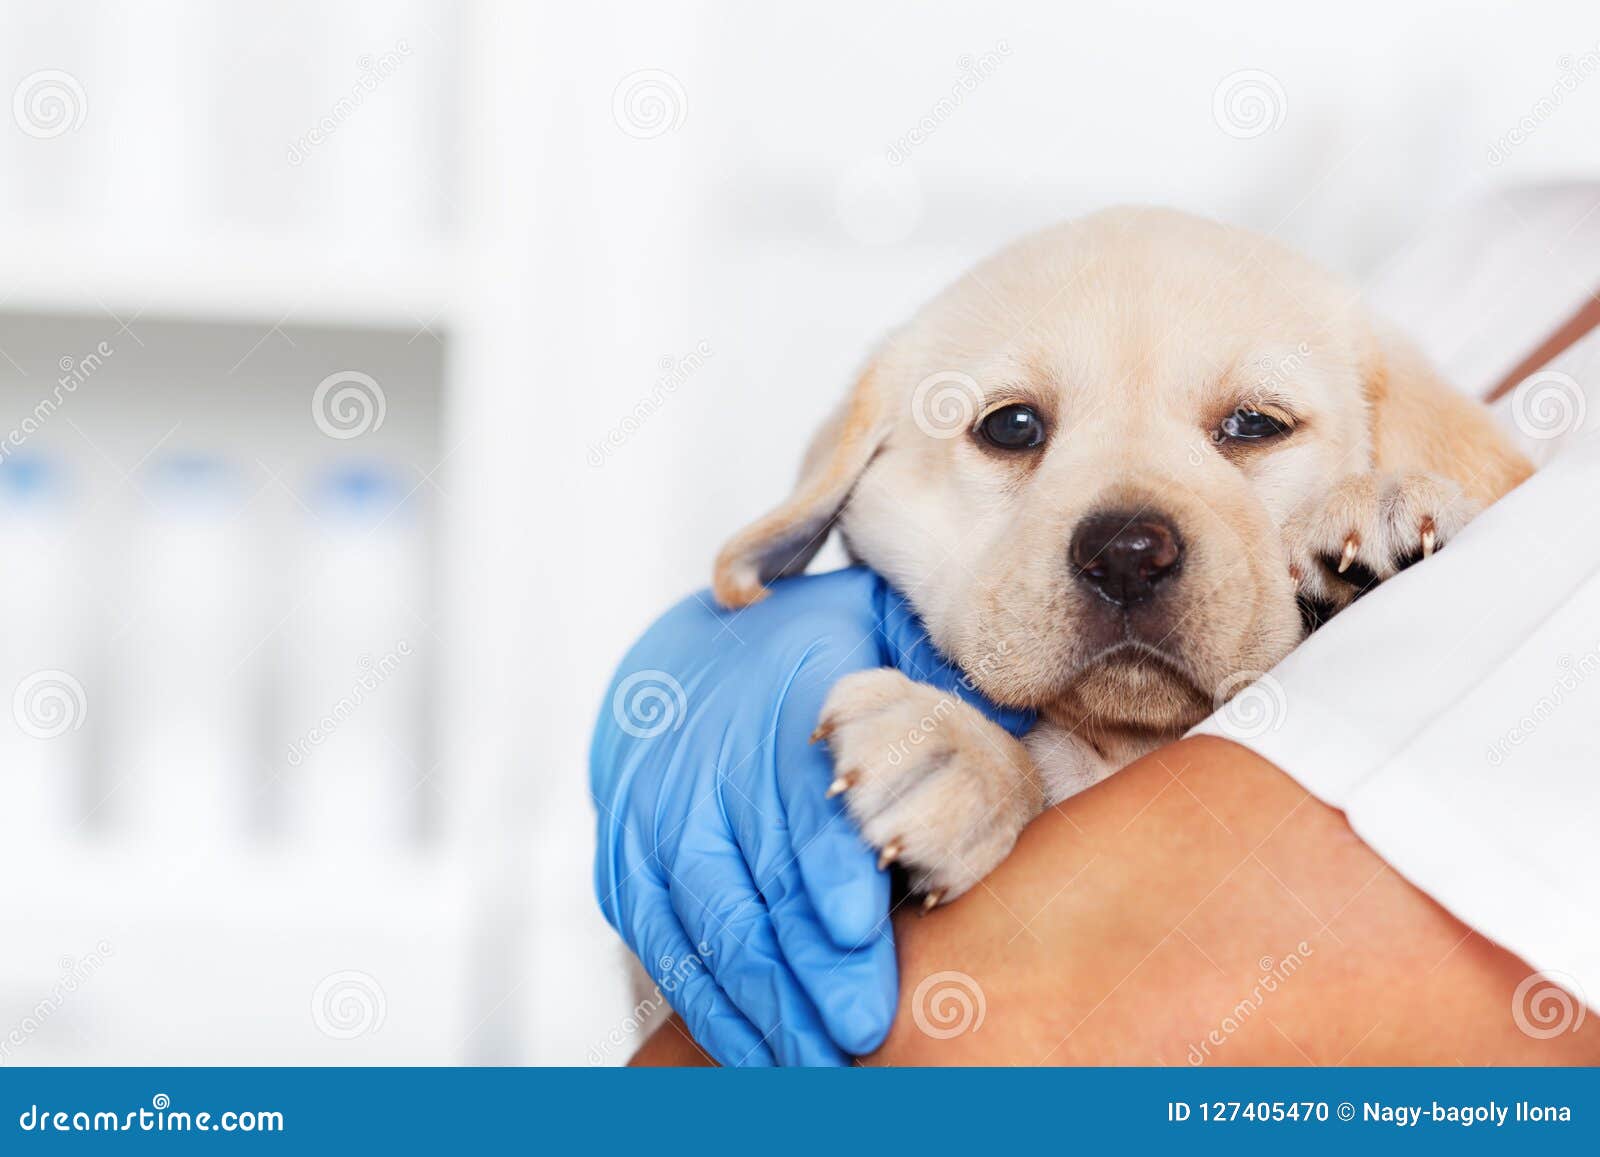 veterinary healthcare professional holding a cute labrador puppy